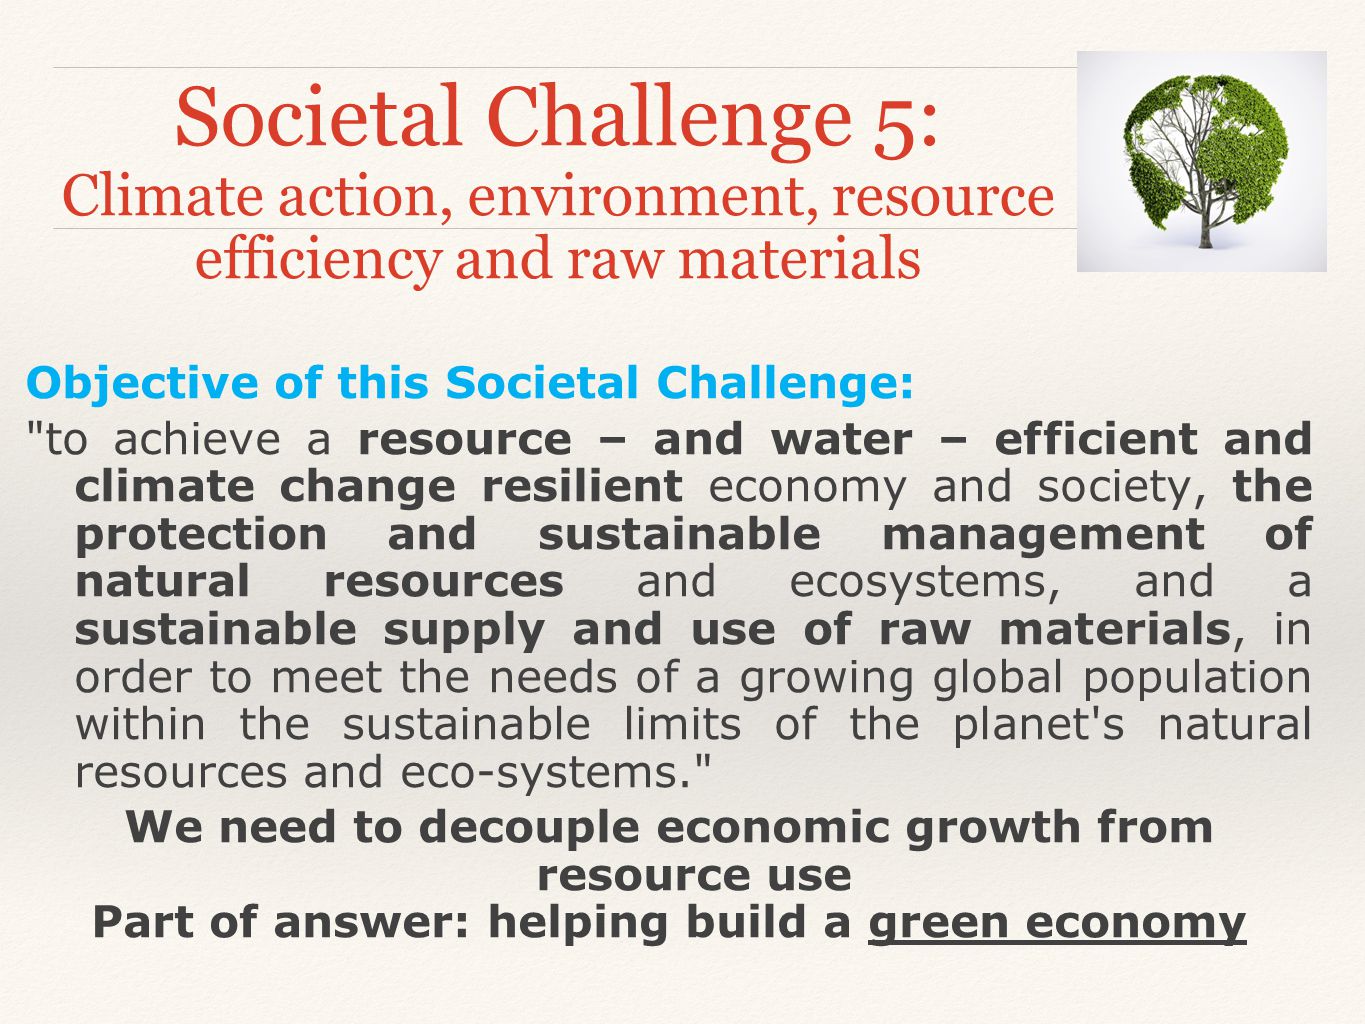 Societal Challenge 5: Climate action, environment, resource efficiency and raw materials Objective of this Societal Challenge: to achieve a resource – and water – efficient and climate change resilient economy and society, the protection and sustainable management of natural resources and ecosystems, and a sustainable supply and use of raw materials, in order to meet the needs of a growing global population within the sustainable limits of the planet s natural resources and eco-systems. We need to decouple economic growth from resource use Part of answer: helping build a green economy